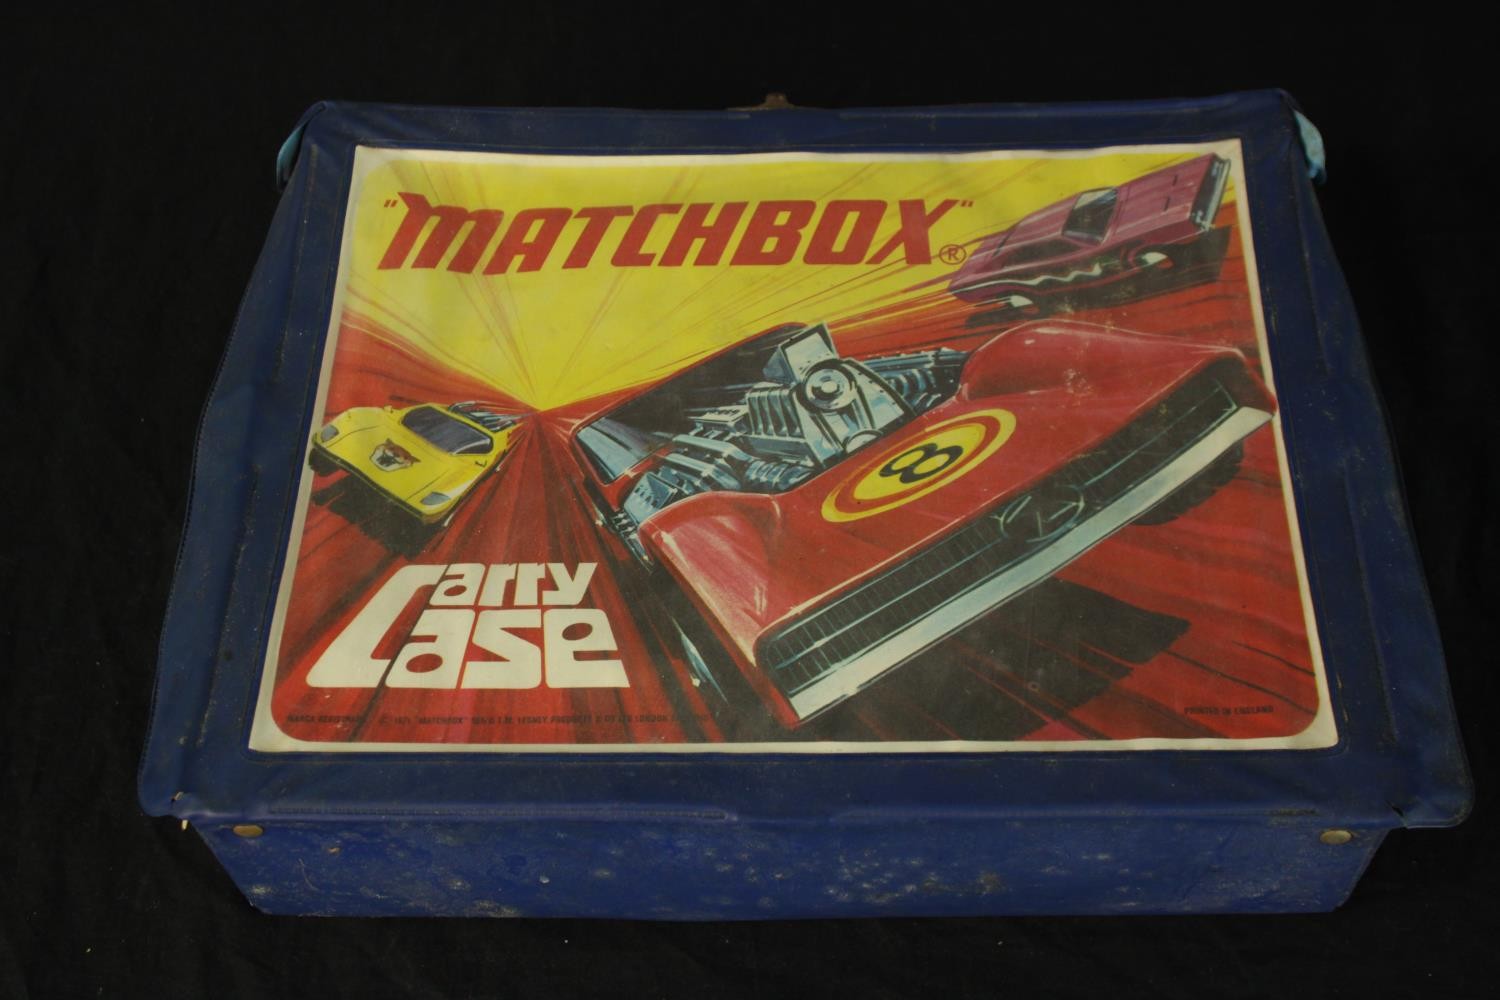 Matchbox Carry Case. With twenty-four cars in used condition. A mix of industrial vehicles and - Image 2 of 4